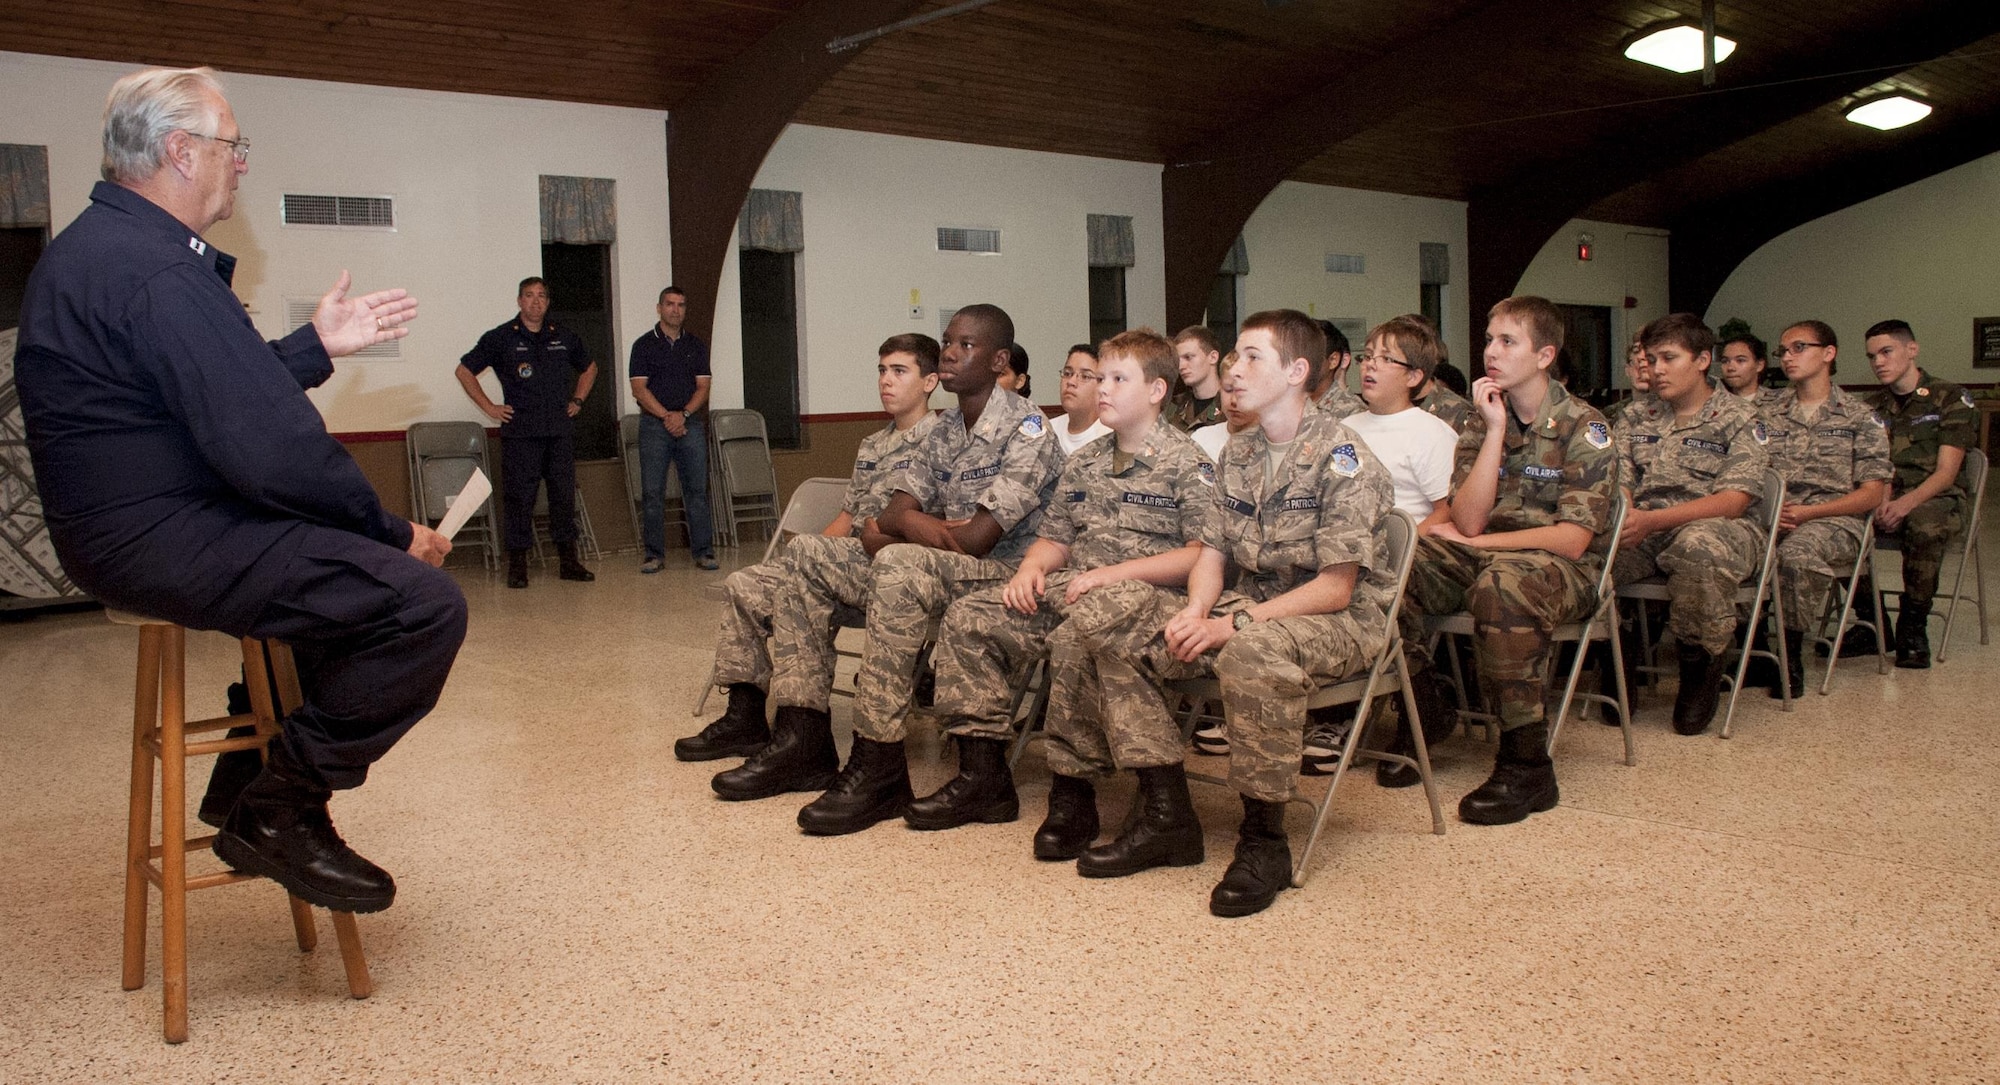 Civil Air Patrol General Chuck Yeager Cadet Squadron cadets listen during a safety briefing in Brandon, Fla., May 8, 2017. The Civil Air Patrol mission focuses on emergency services, aerospace education, and cadet programs.  (U.S. Air Force by Airman 1st Class Mariette Adams)